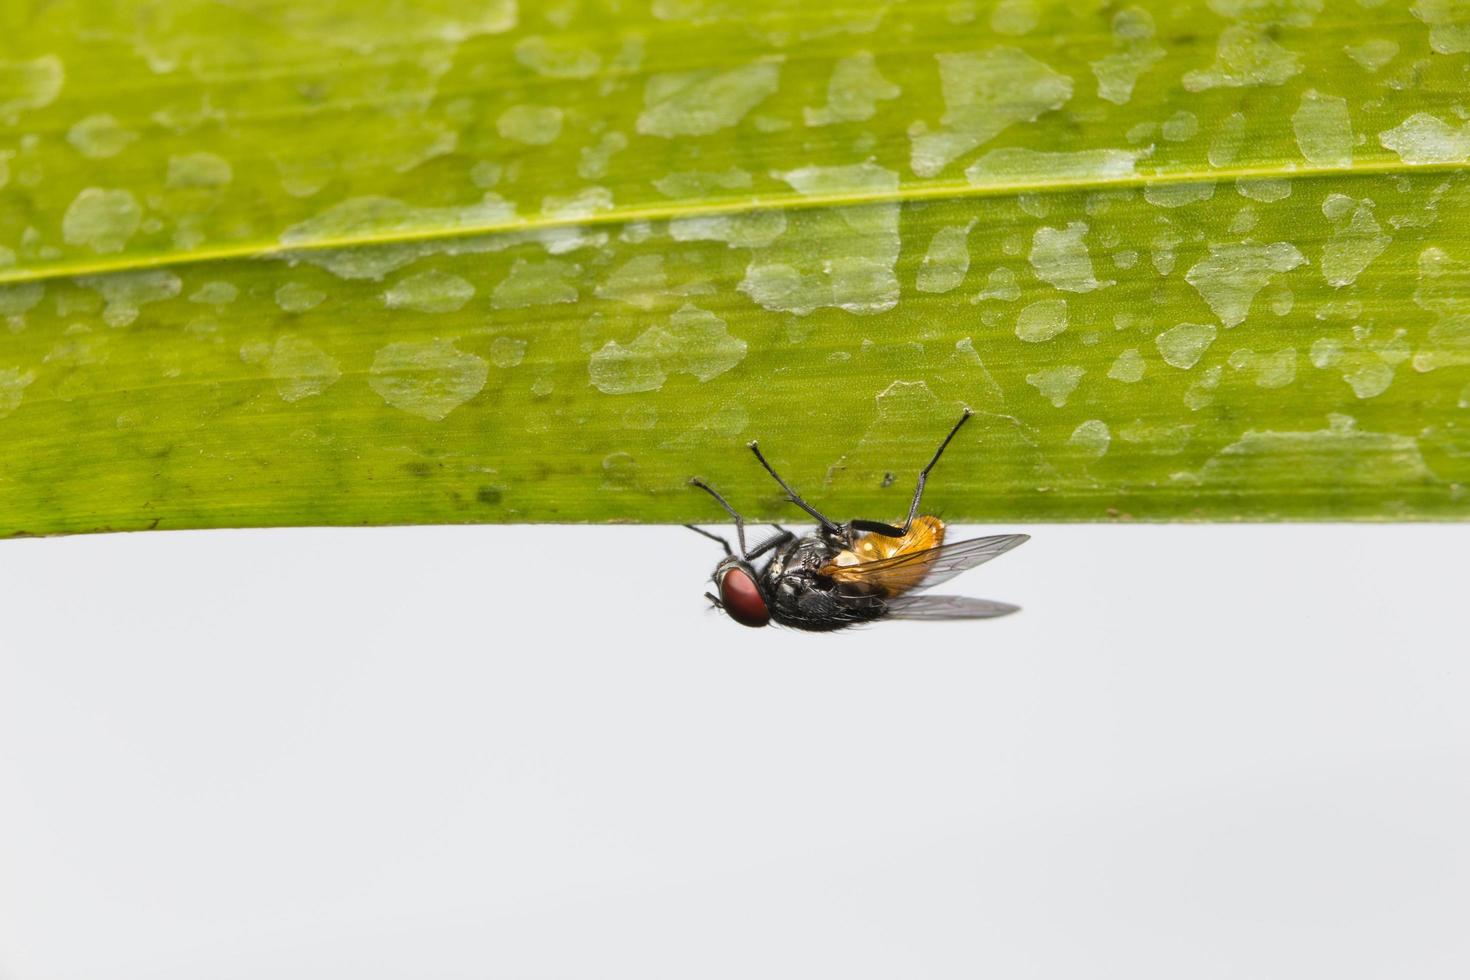 Fly on a leaf photo